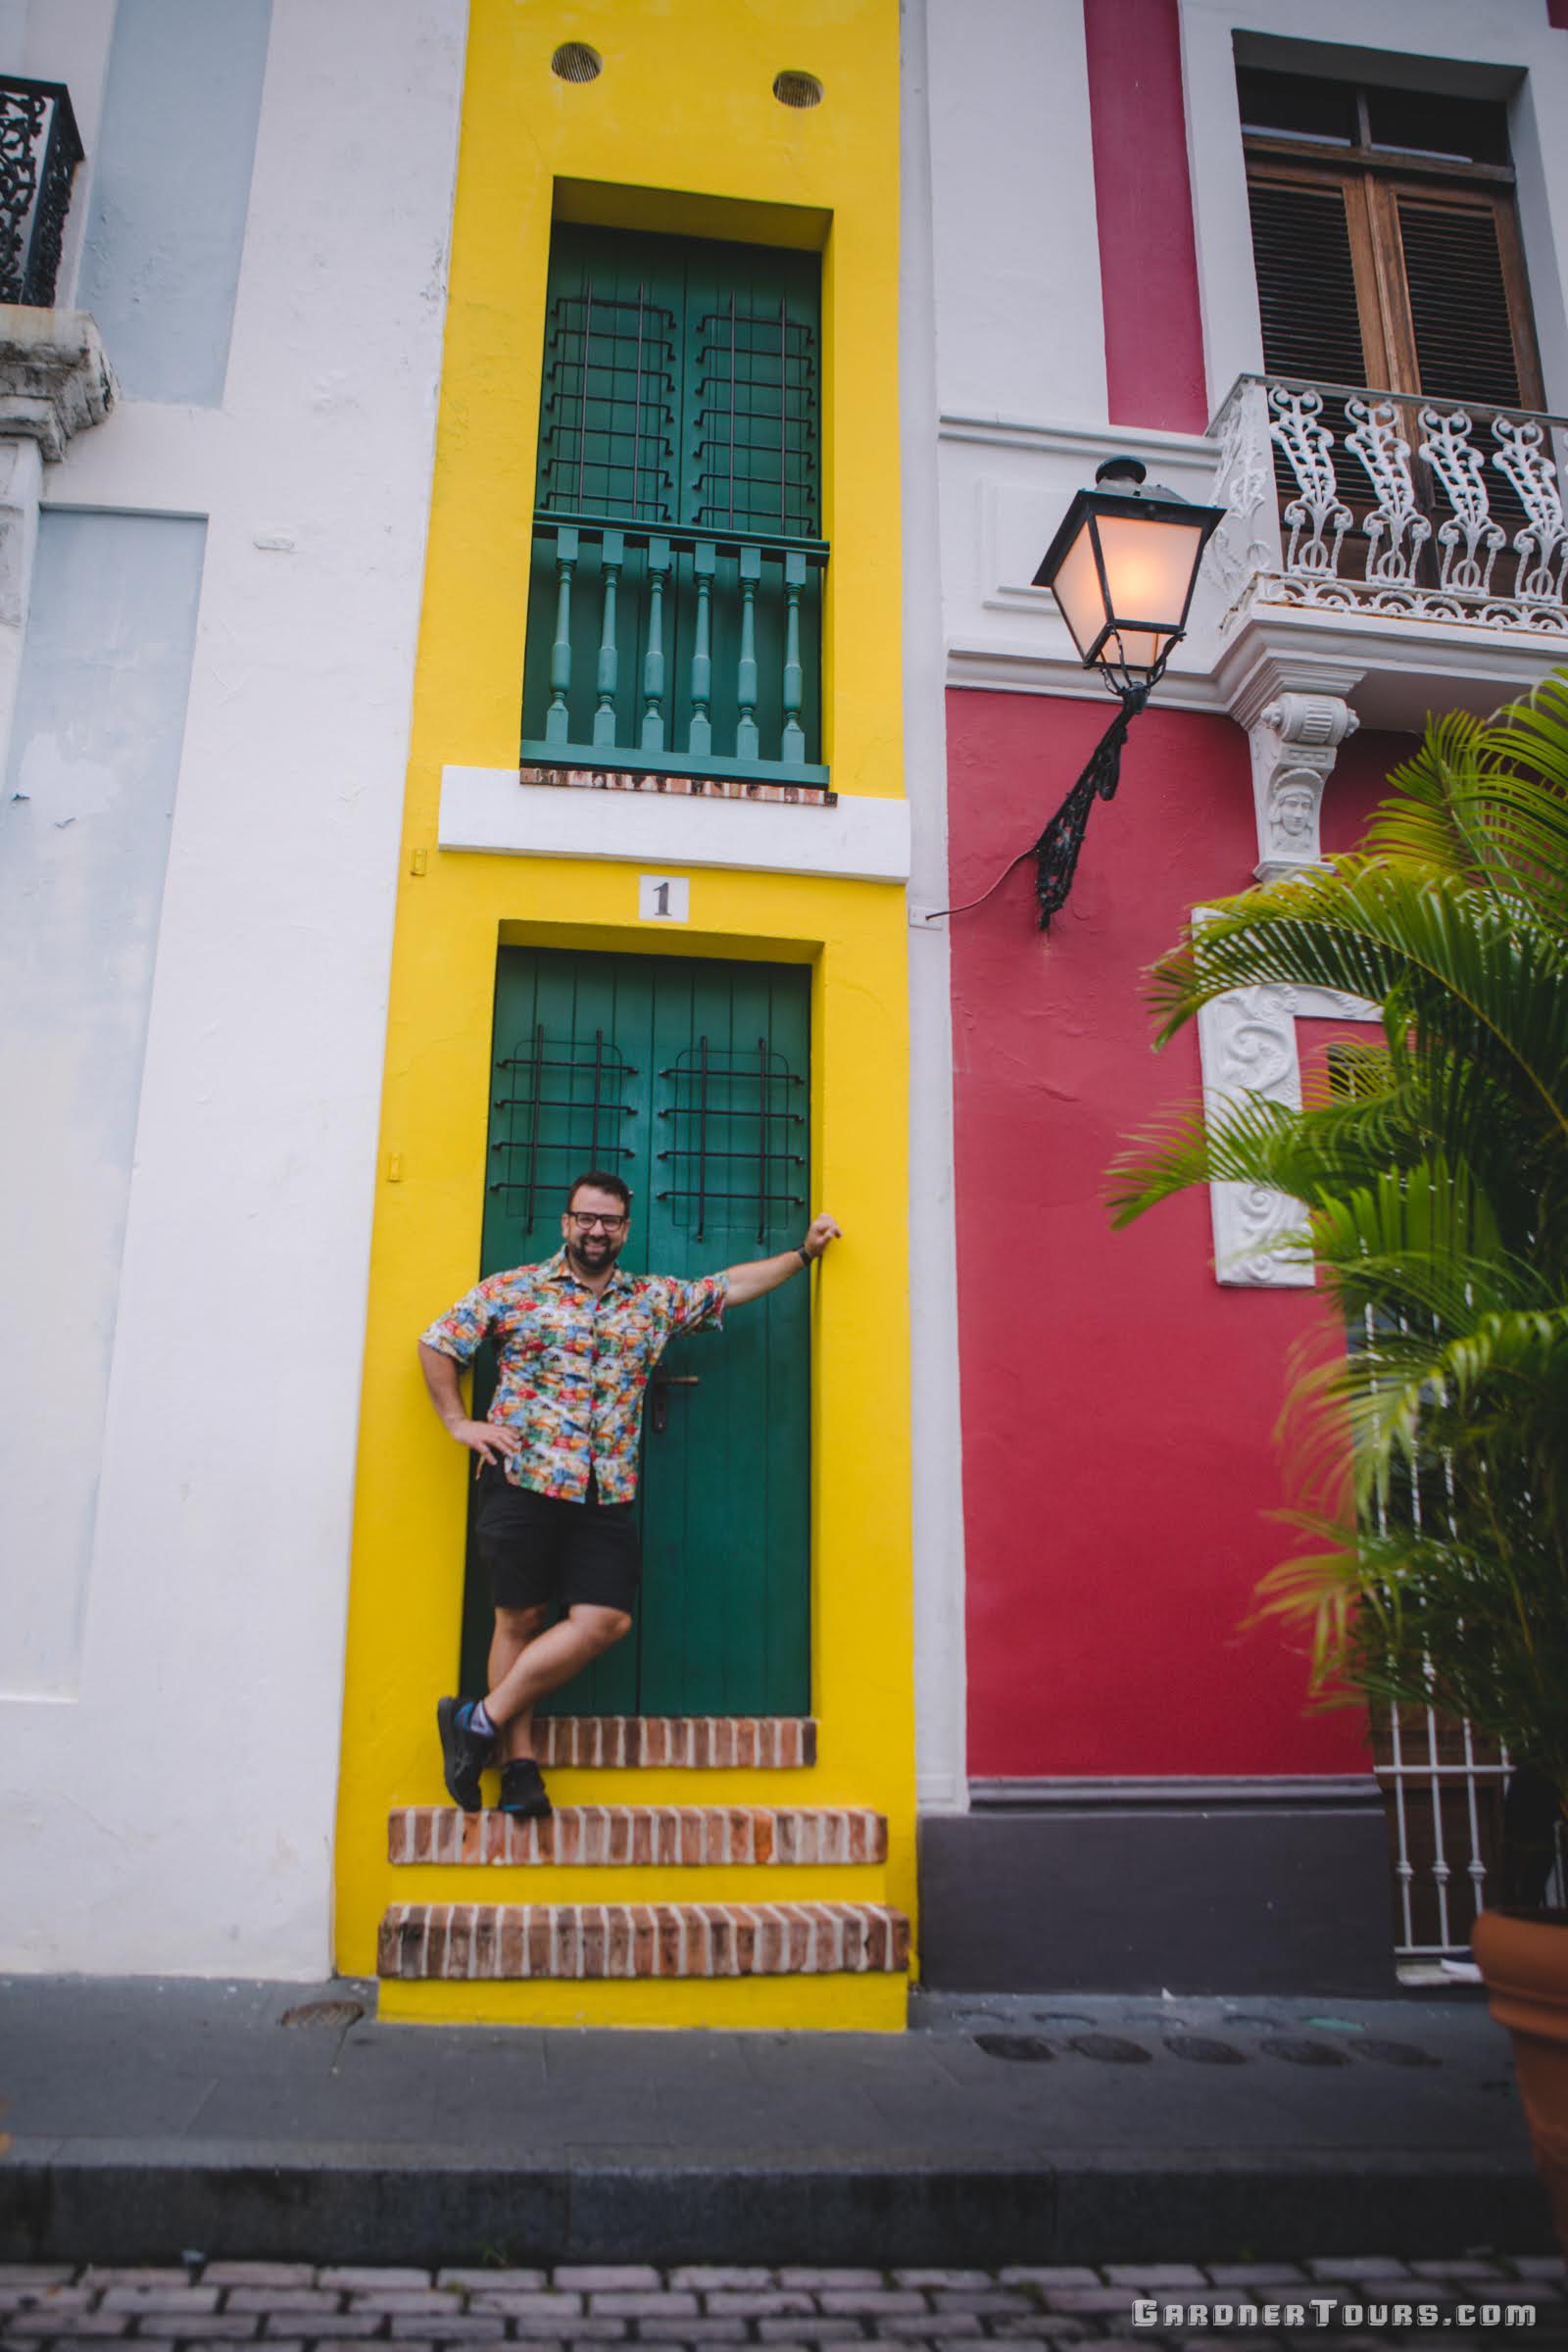 Gardner Tours Owner and Tour Guide Colby Gardner in front of the world's most narrow home in San Juan, Puerto Rico